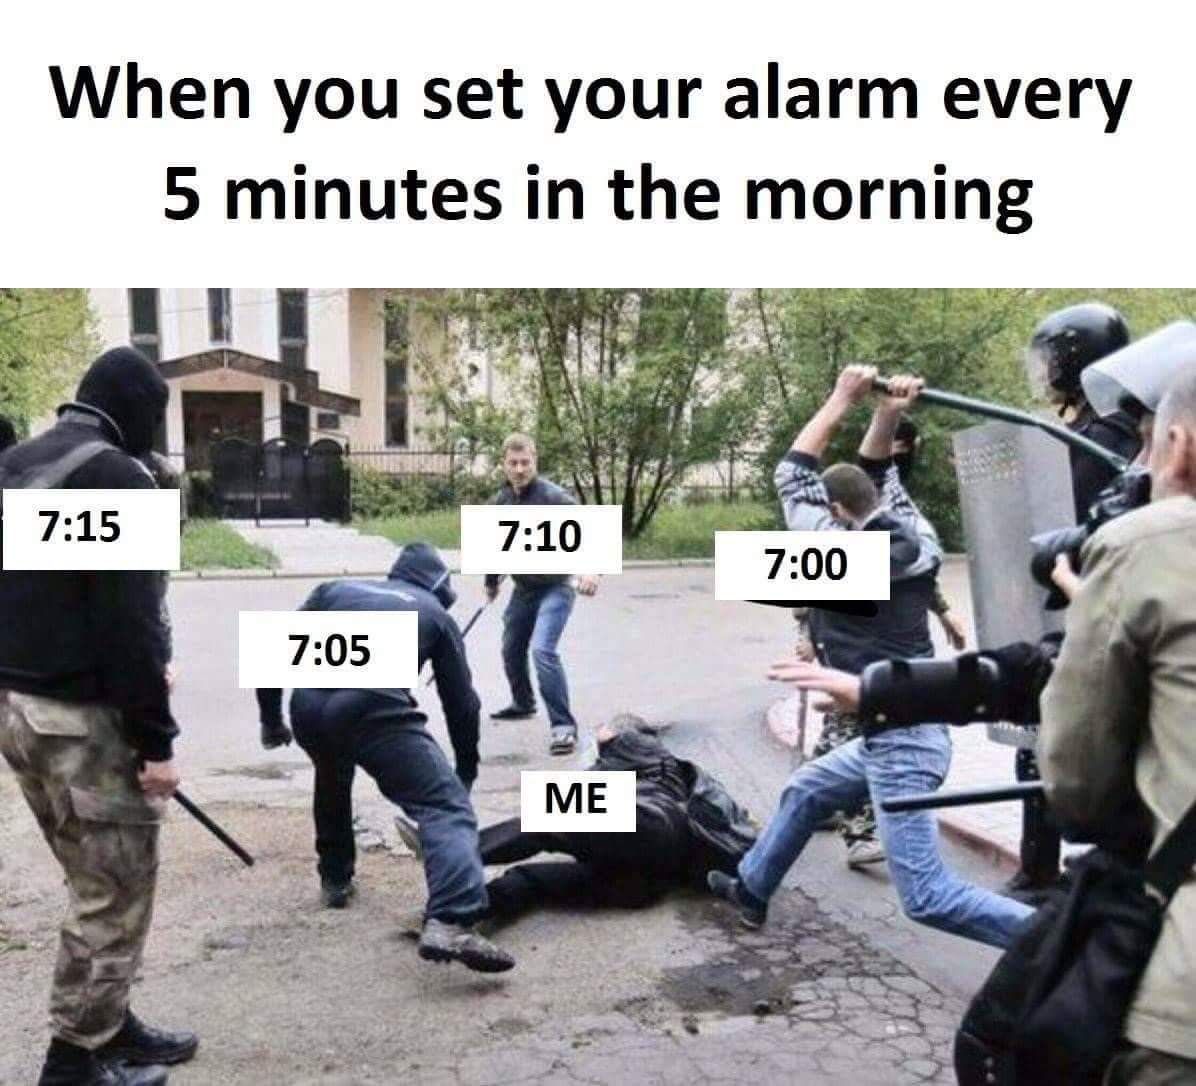 Every f. morning.